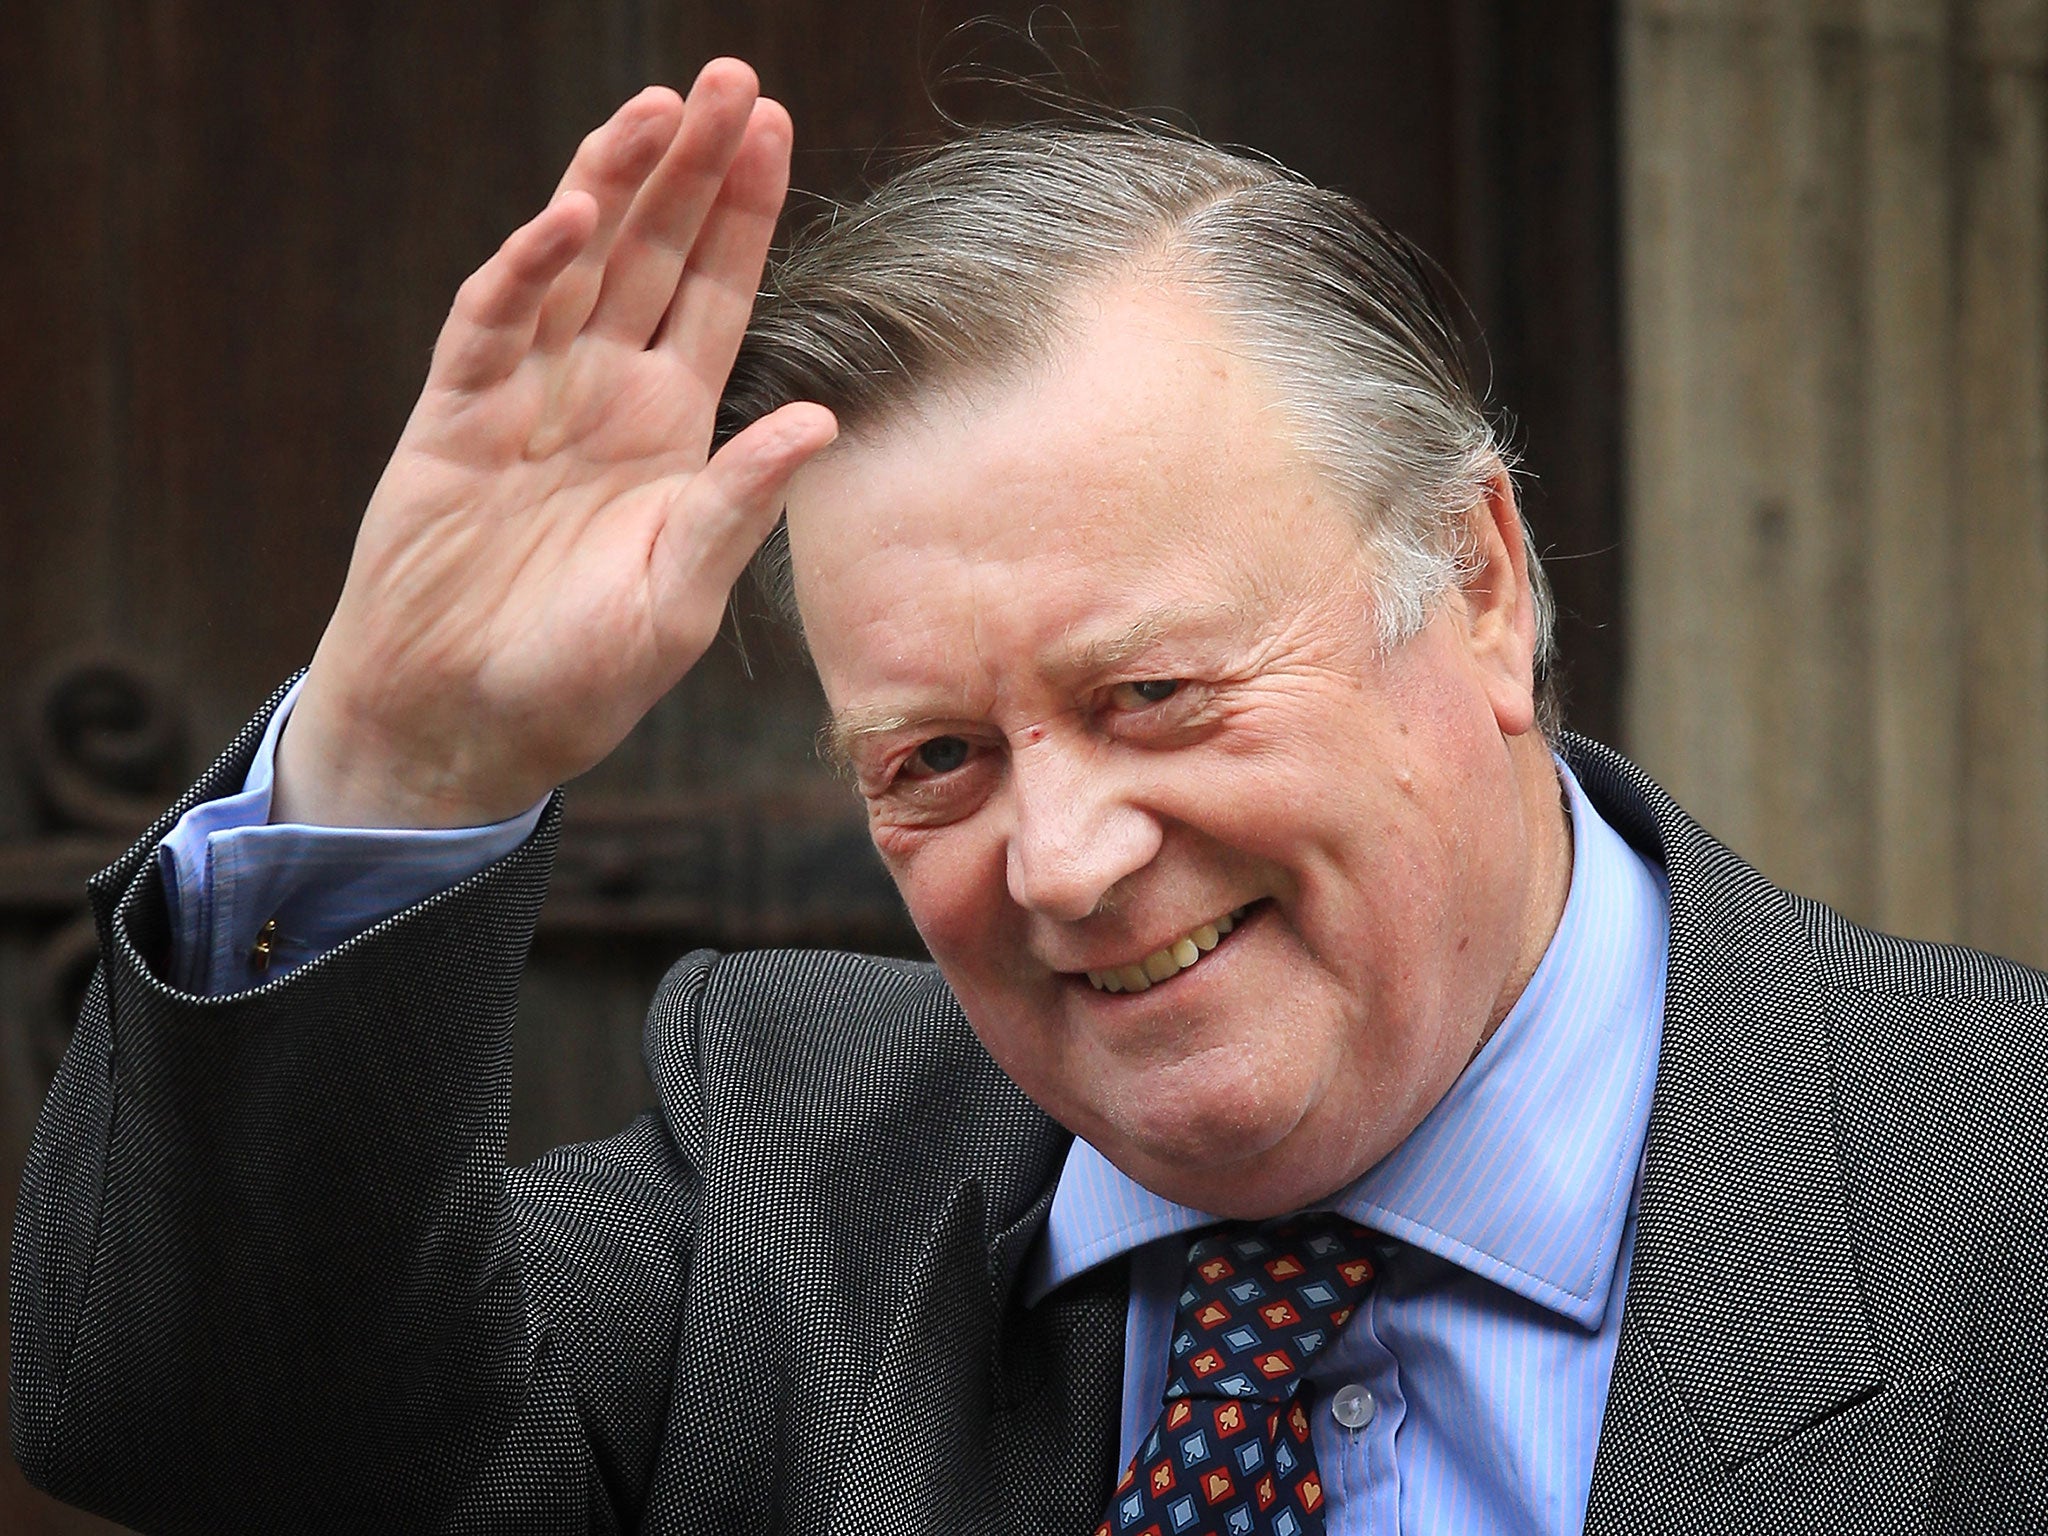 Ken Clarke is not about to wave goodbye to Parliament